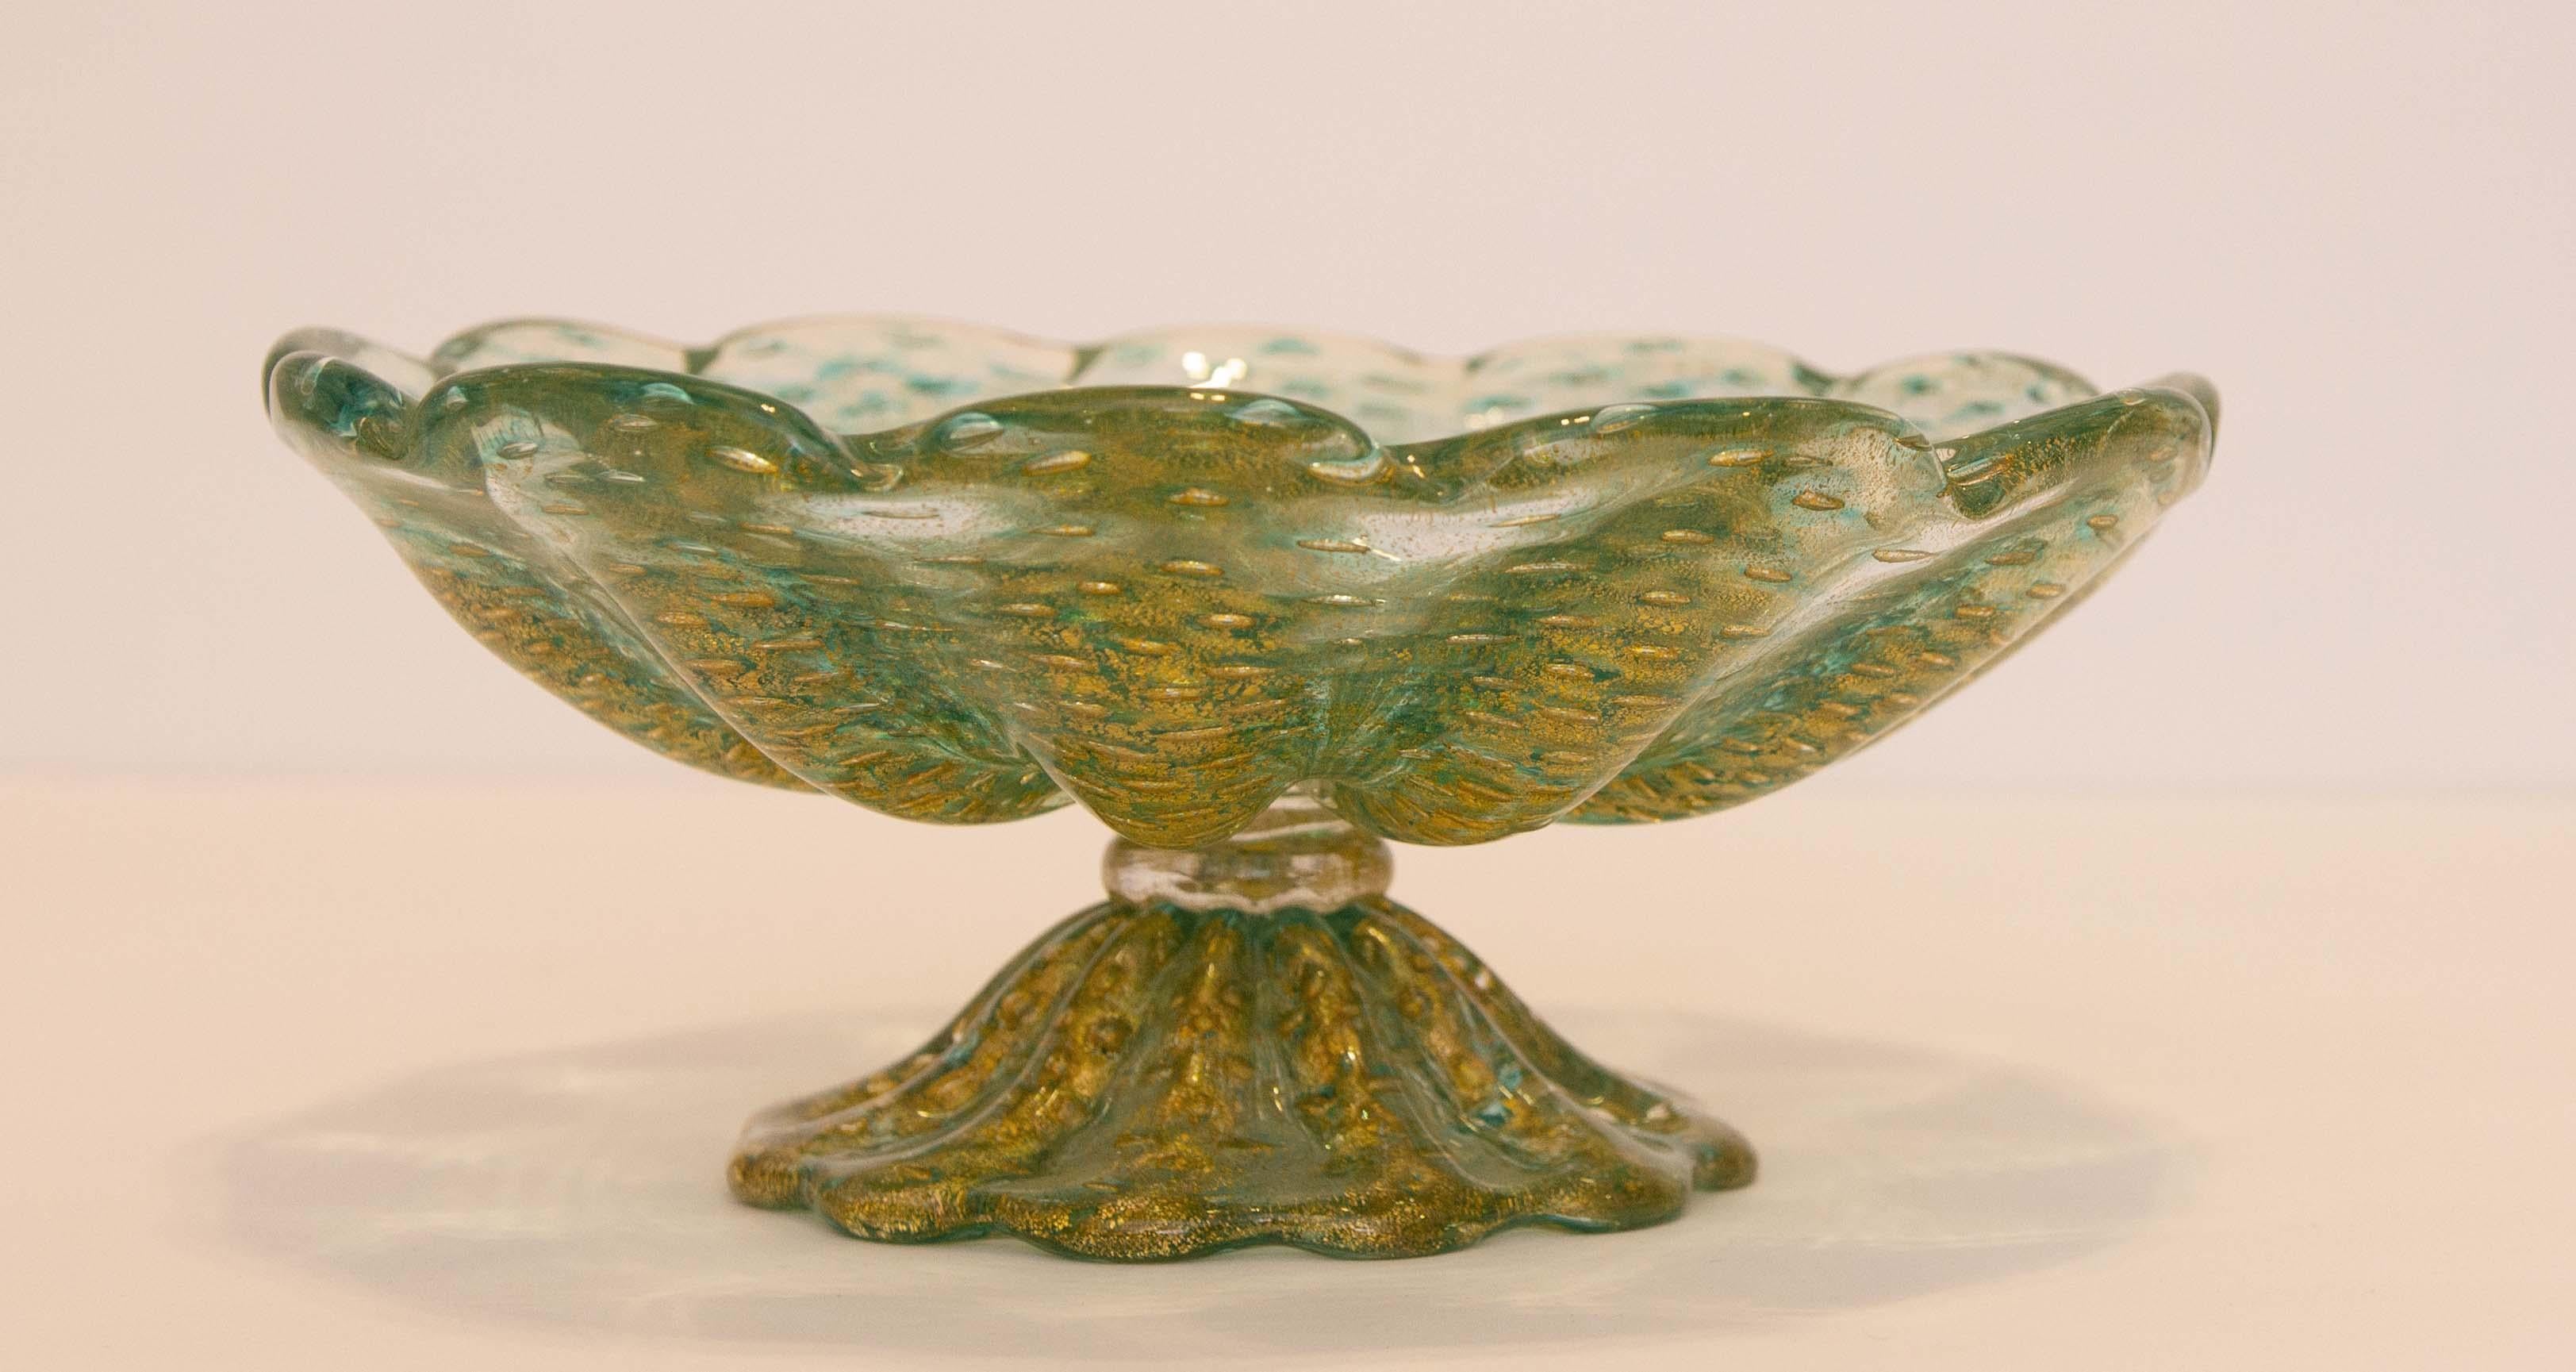 Murano glass compote. Clear and aquamarine glass with lots of gold flecks. Vintage mid 20th century. Attributed to Ercole Barovier Toso.


